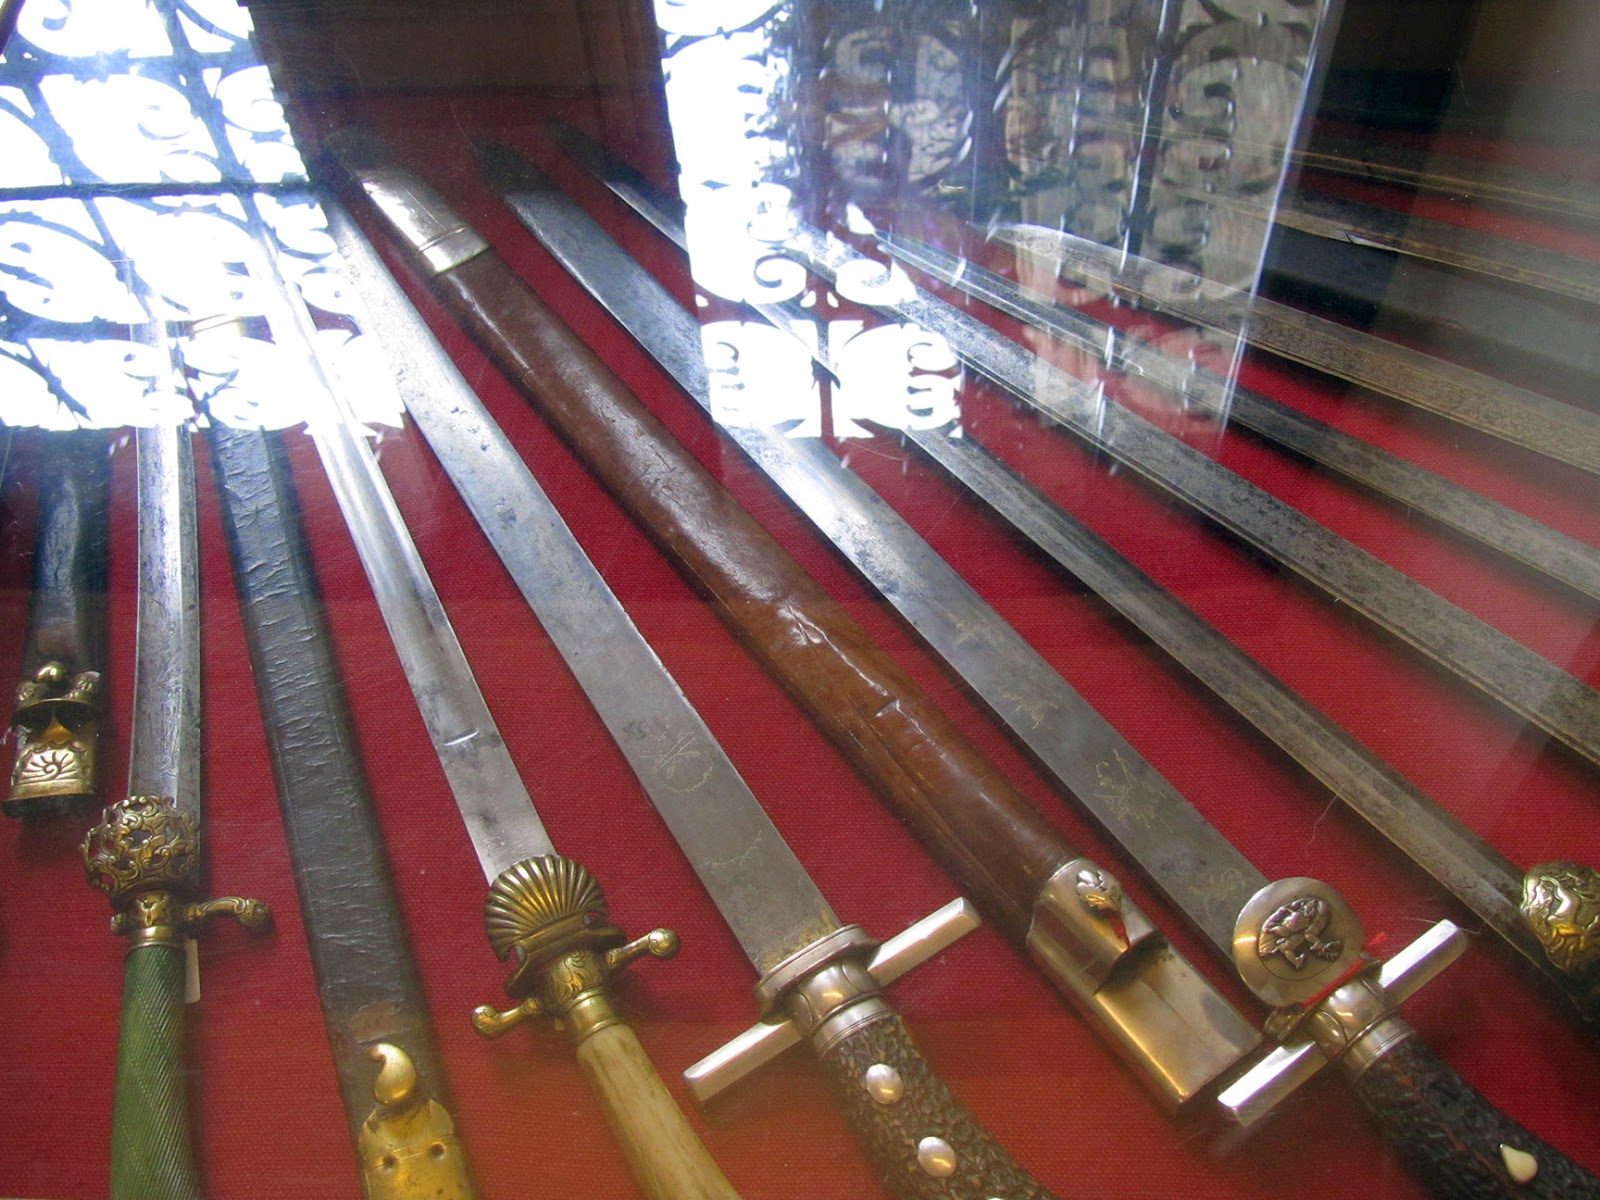 collection of swords on display